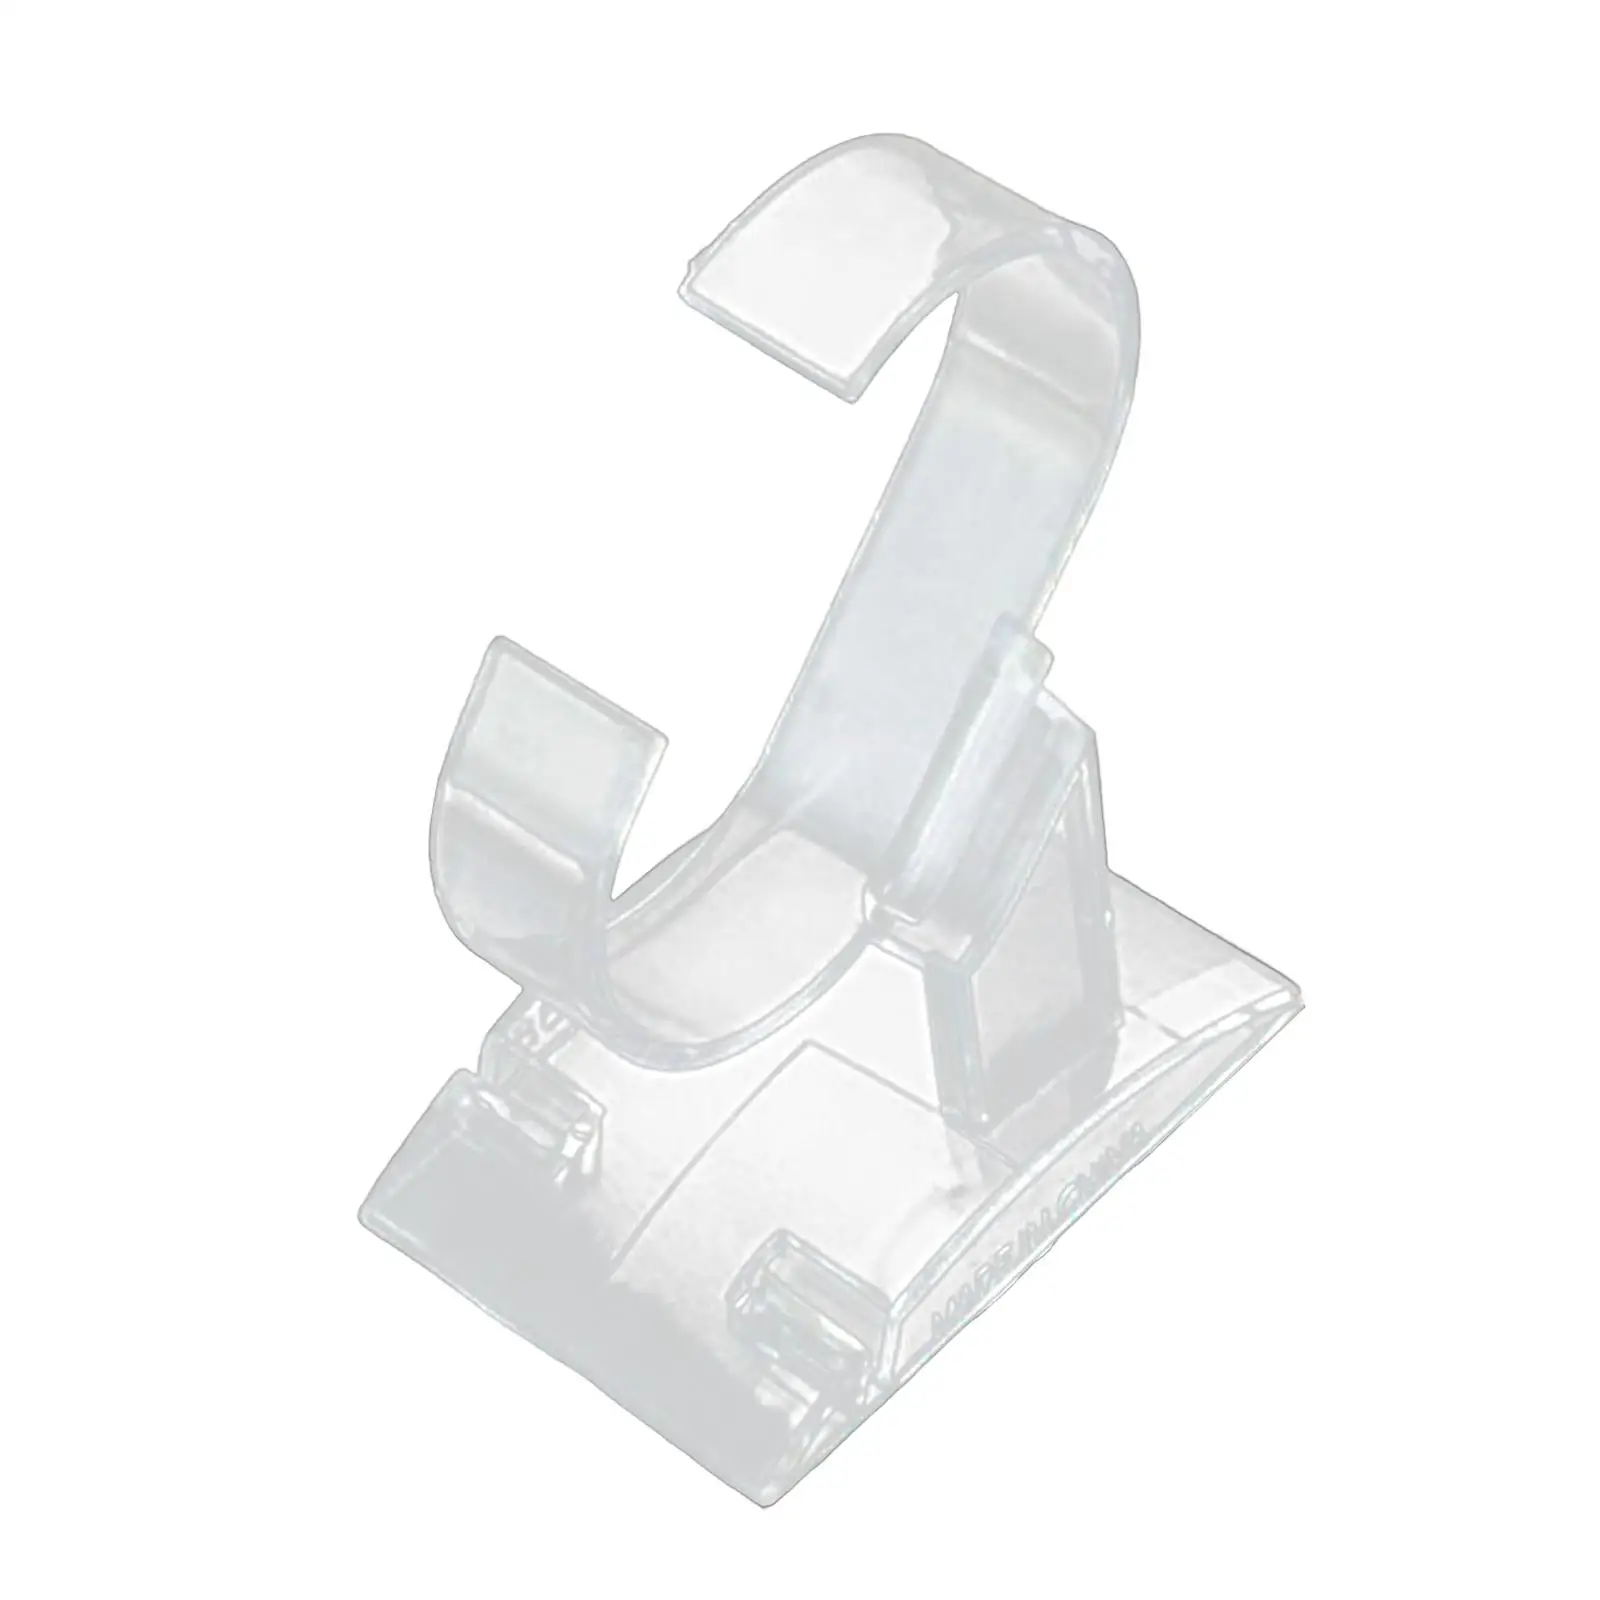 Watch Holder C Shape Clear Multifunction Vertical Display Stand Watch Display Stand for Store Usage Commercial Use Showcases